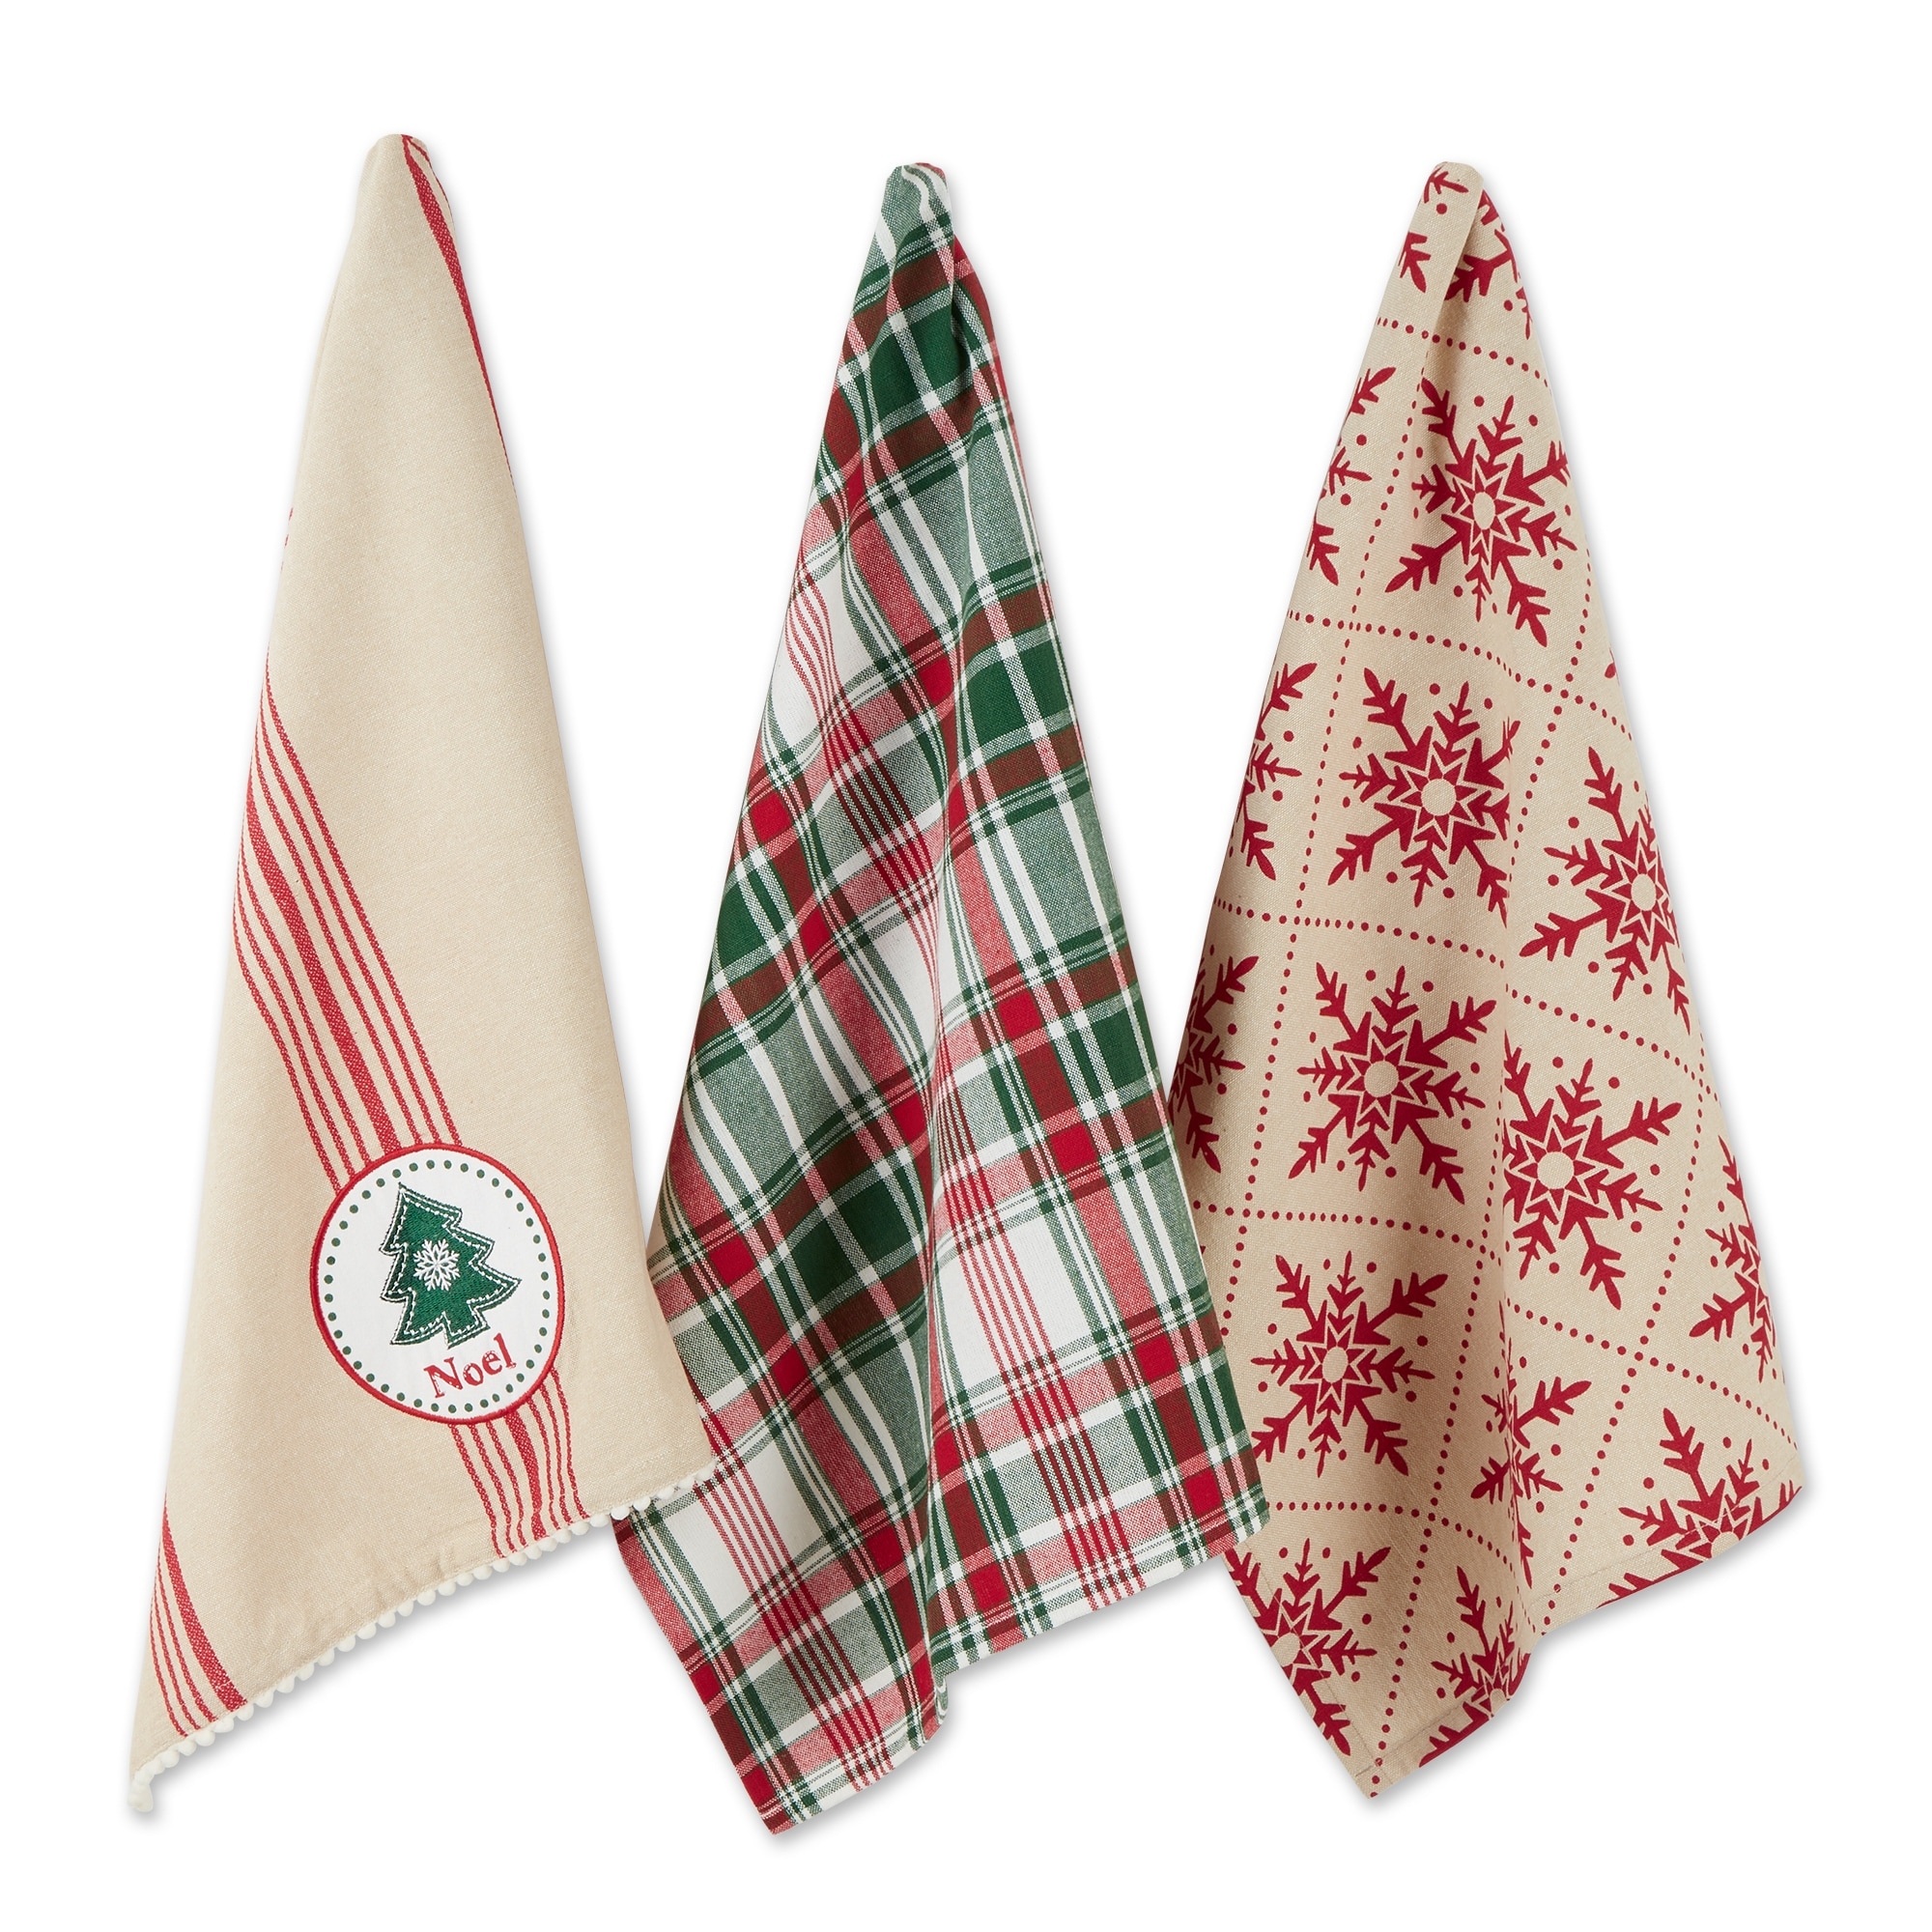 https://ak1.ostkcdn.com/images/products/is/images/direct/8cab78611185acb334c159935738ce2e759b65cd/DII-Asst-Nordic-Tree-Dishtowel-%28Set-of-3%29.jpg